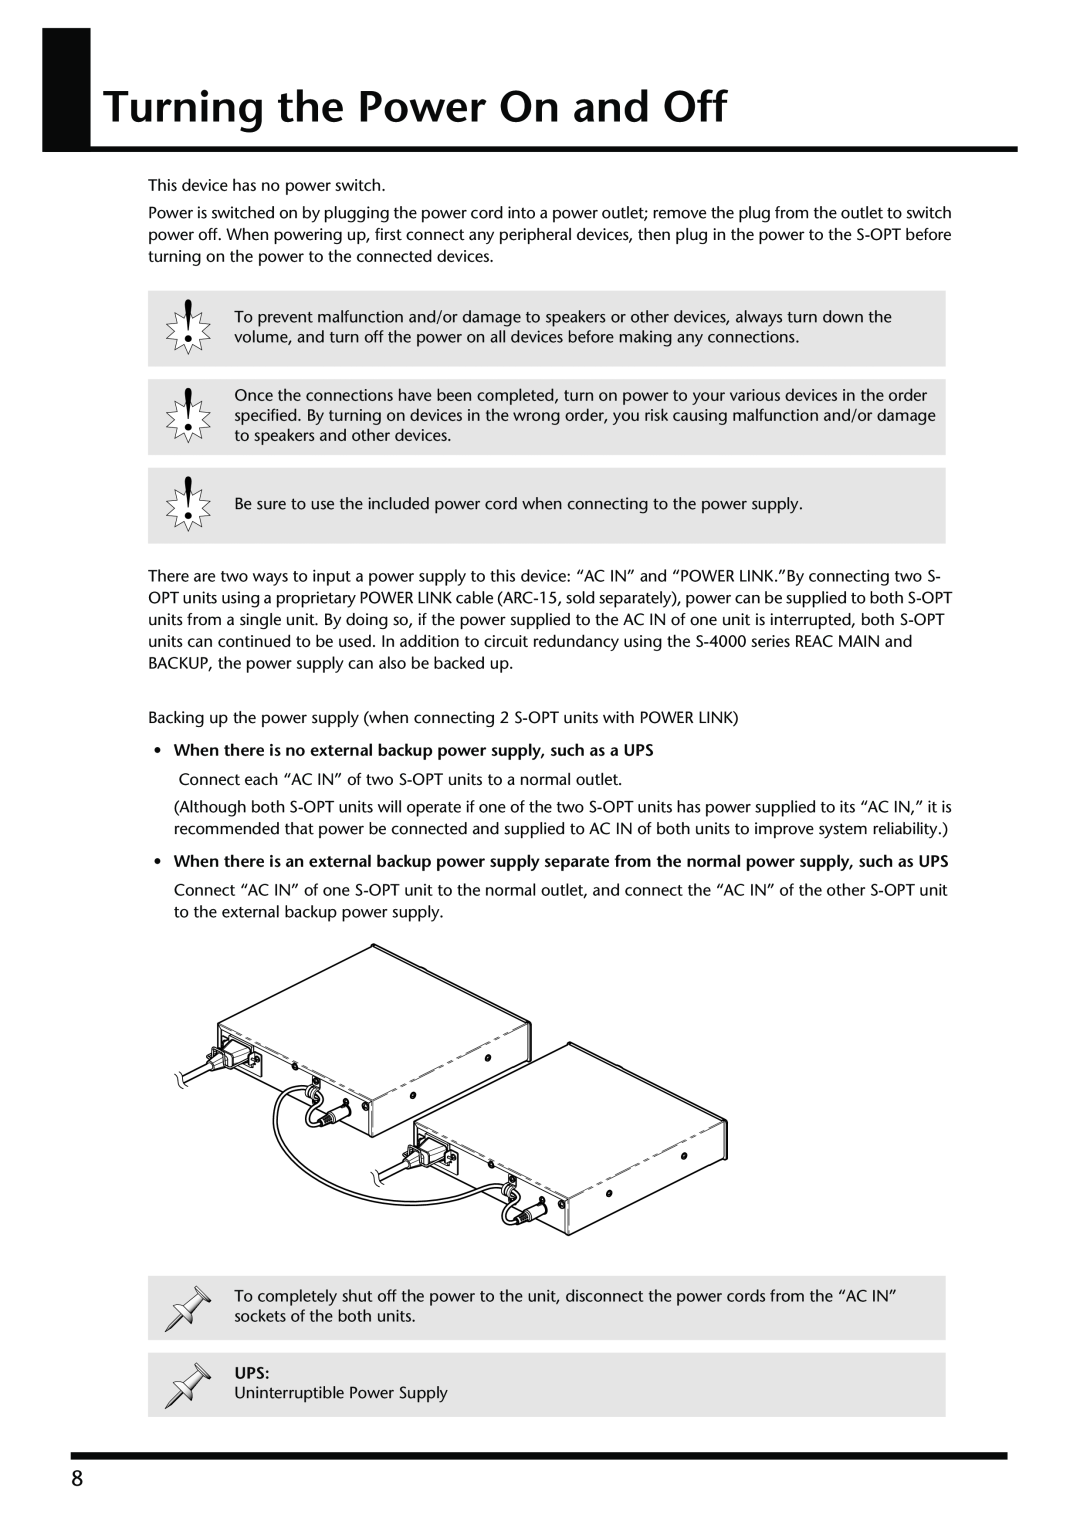 Roland S-OPT owner manual Turning the Power On and Off 